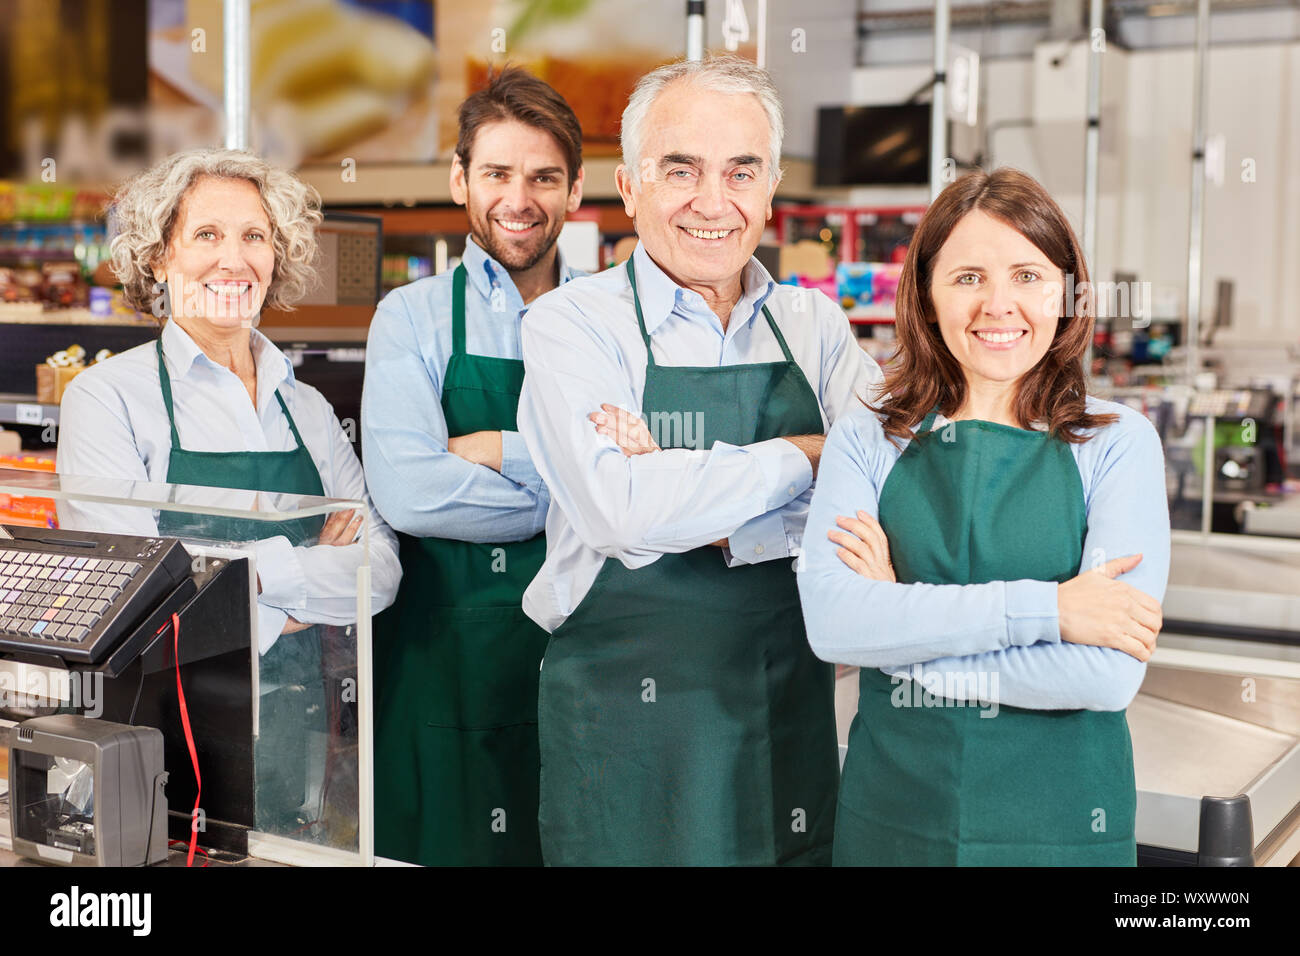 Group of smiling salesmen with market manager and trainee at supermarket checkout Stock Photo